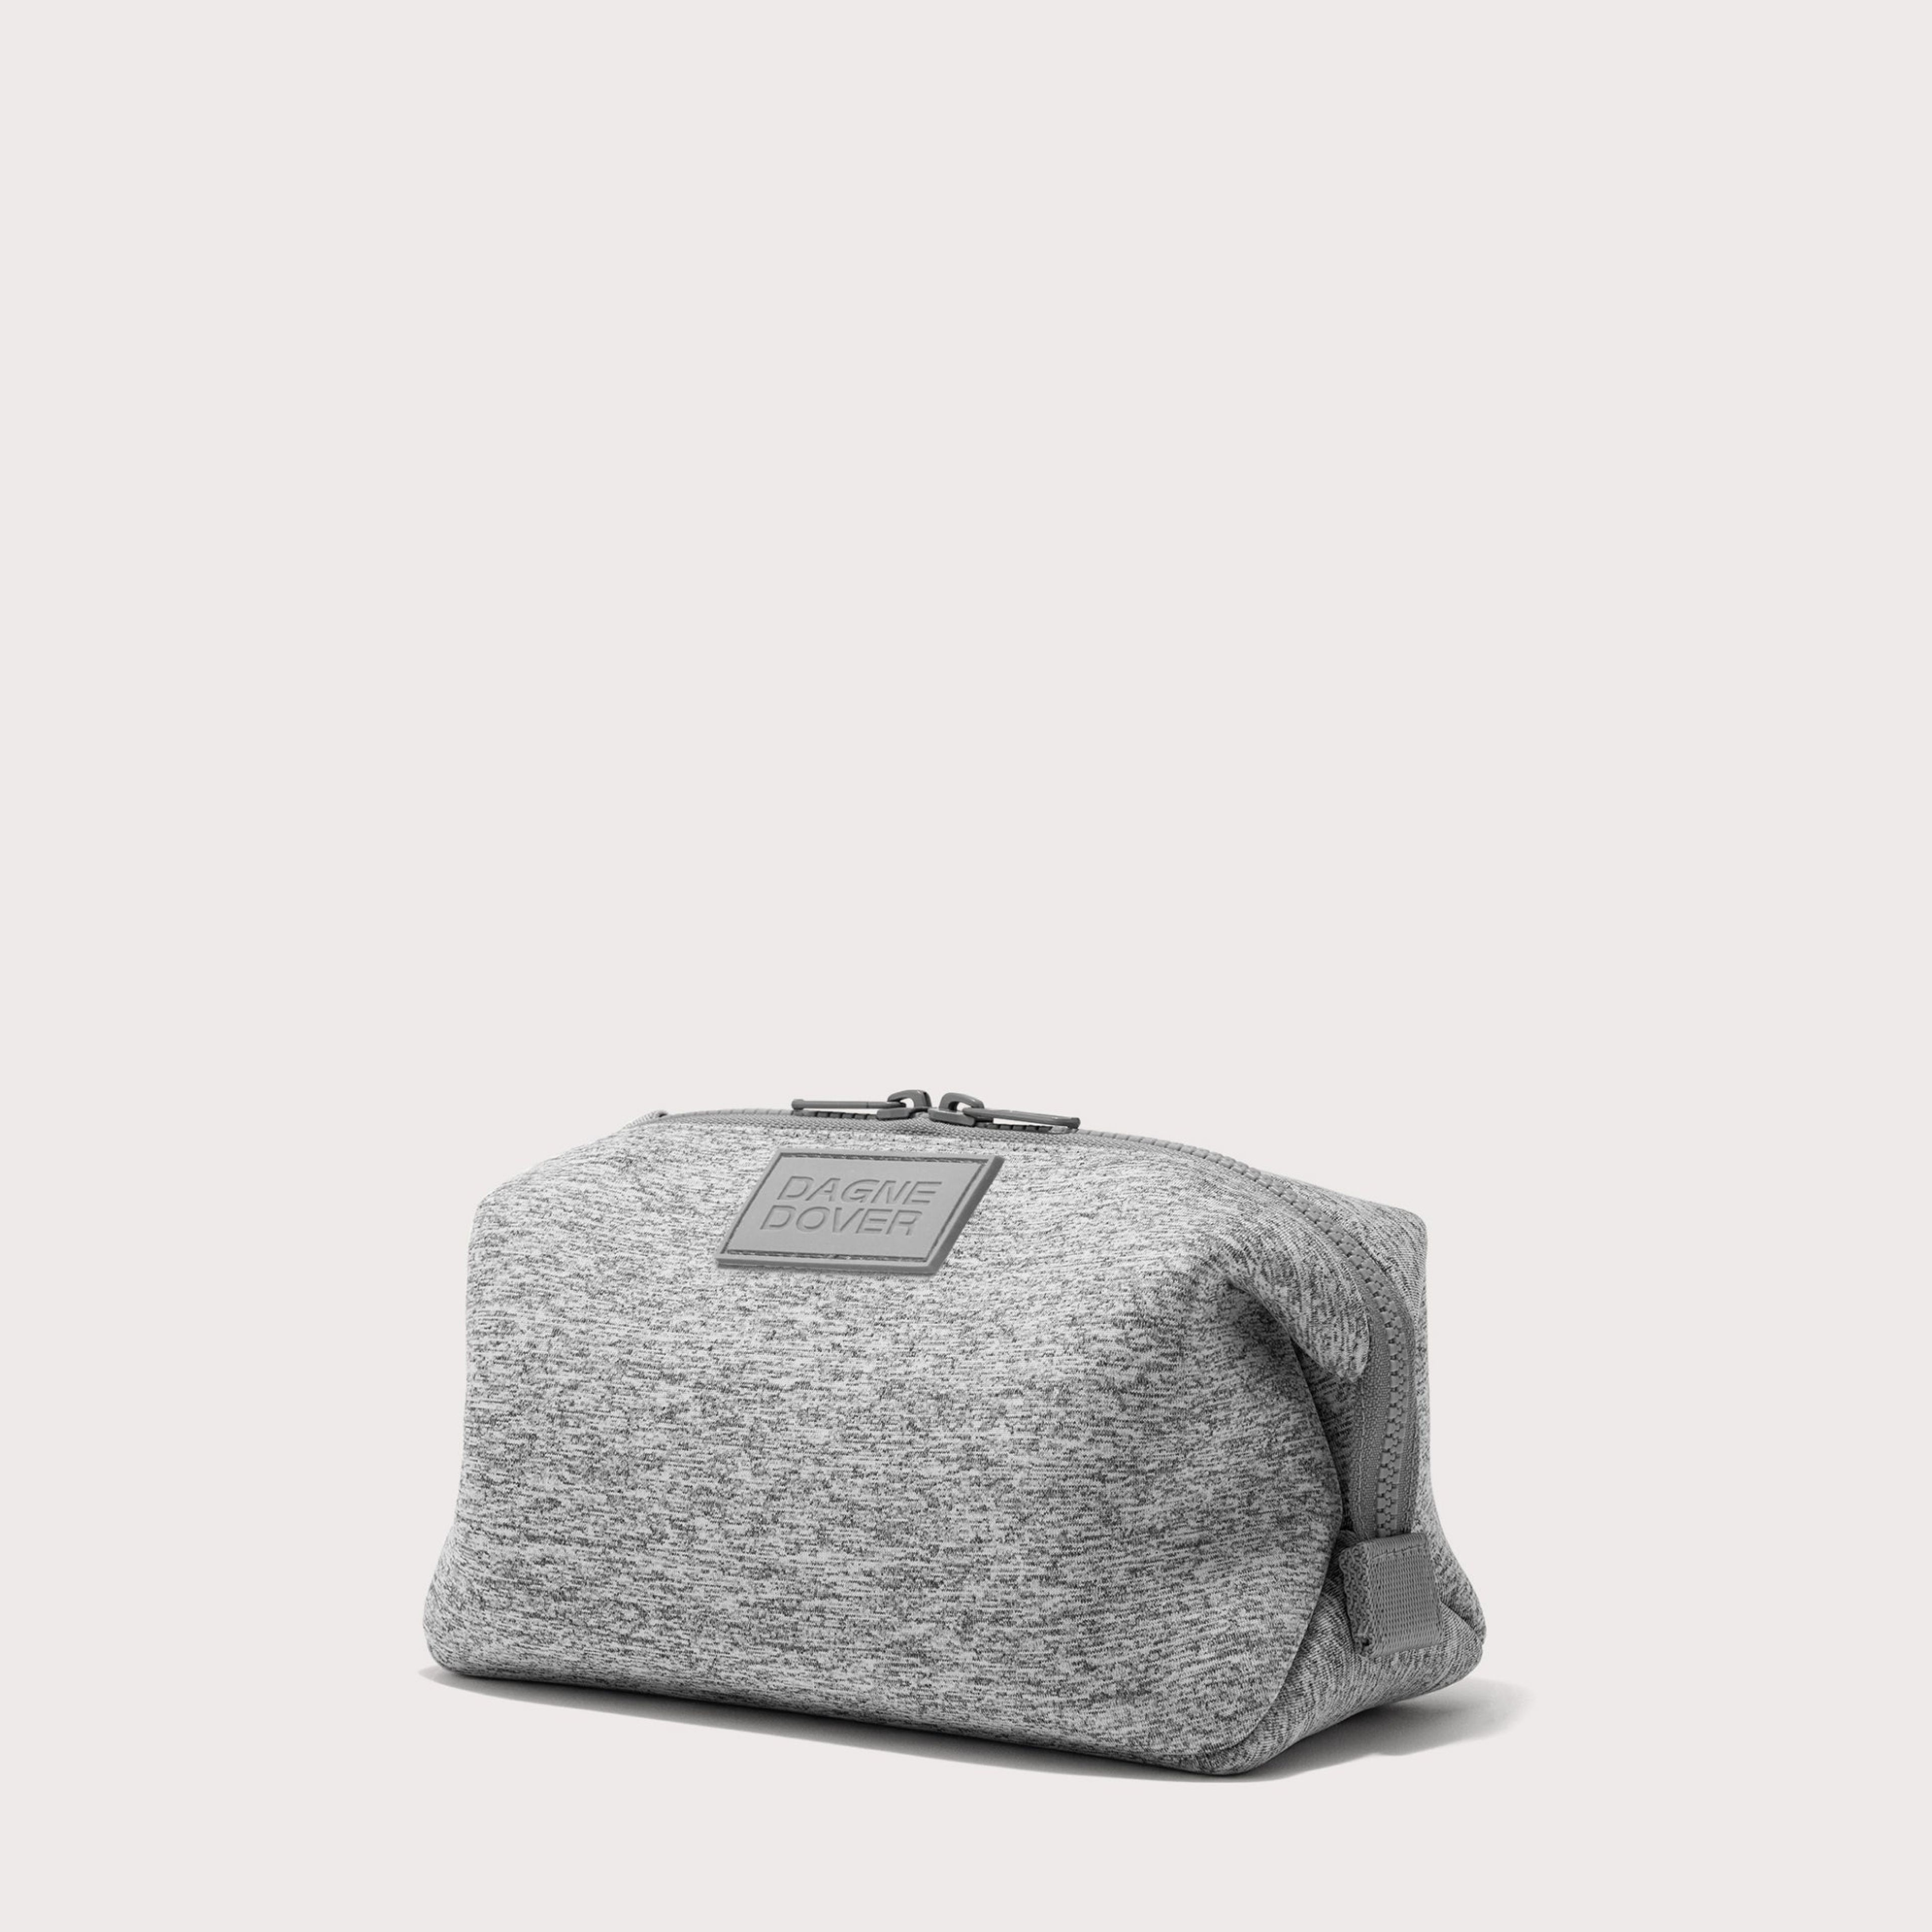 Hunter Toiletry Bag in Heather Grey, Large